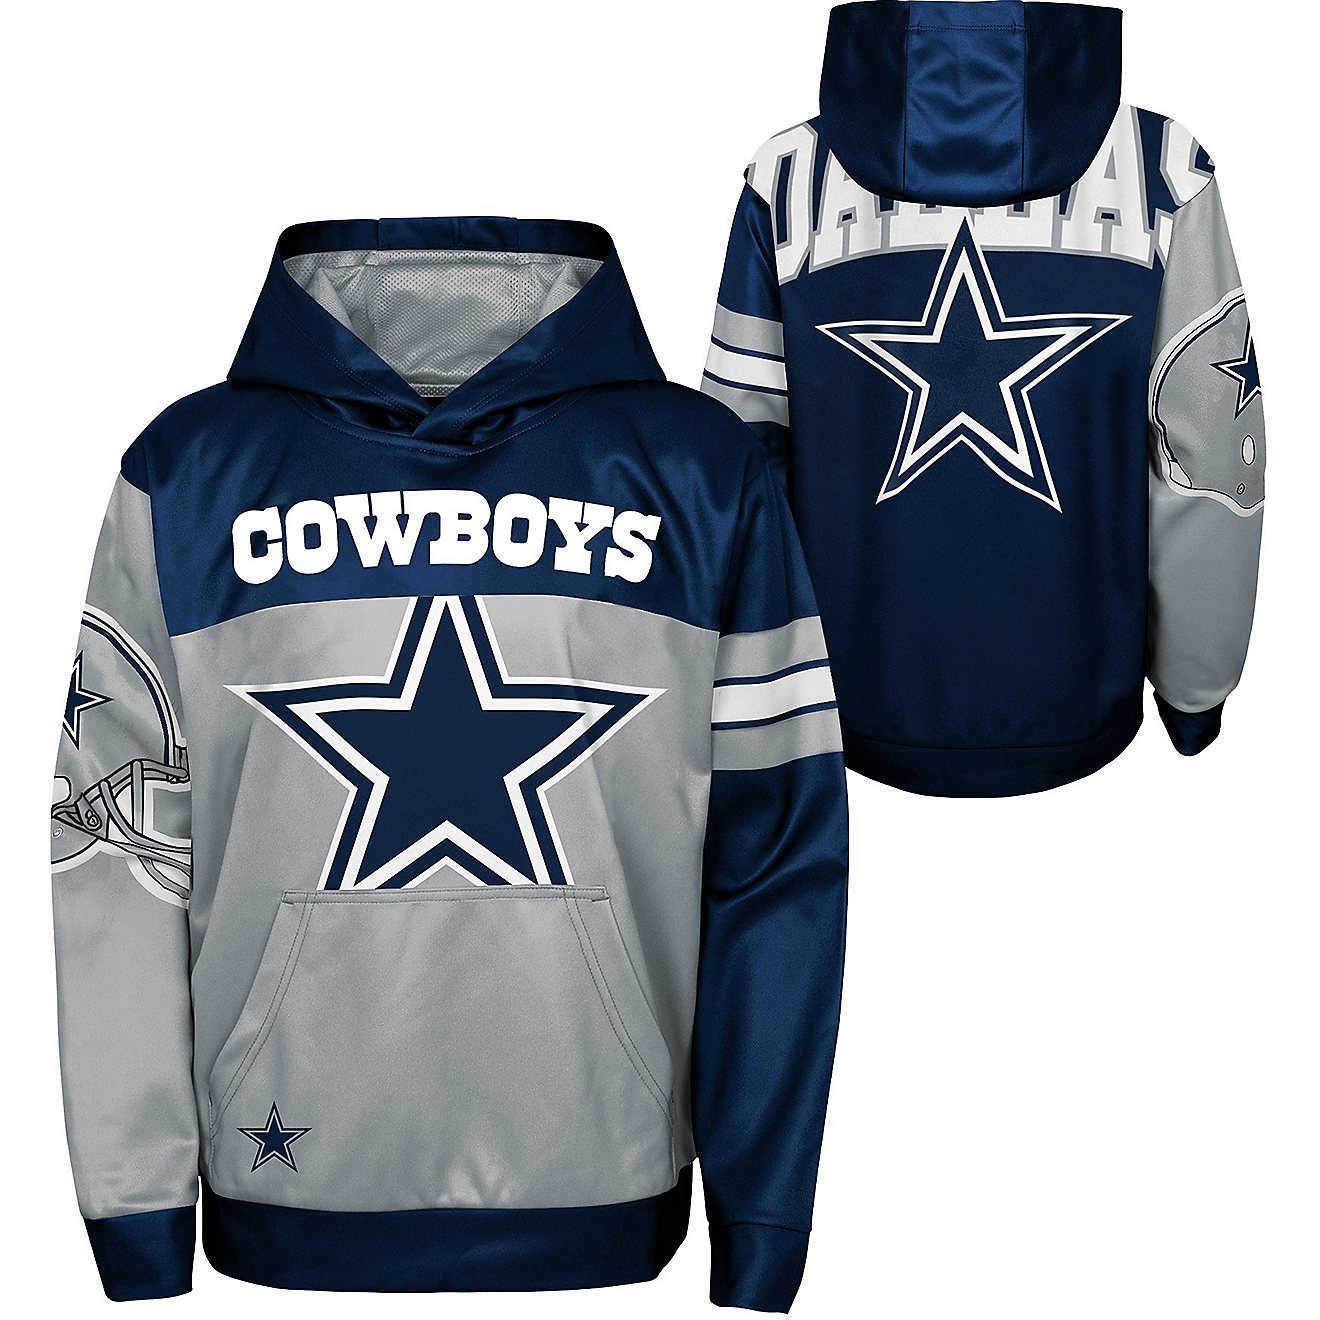 NFL Boys' Dallas Cowboys First & Goal Sub Fleece Hoodie                                                                          - view number 1